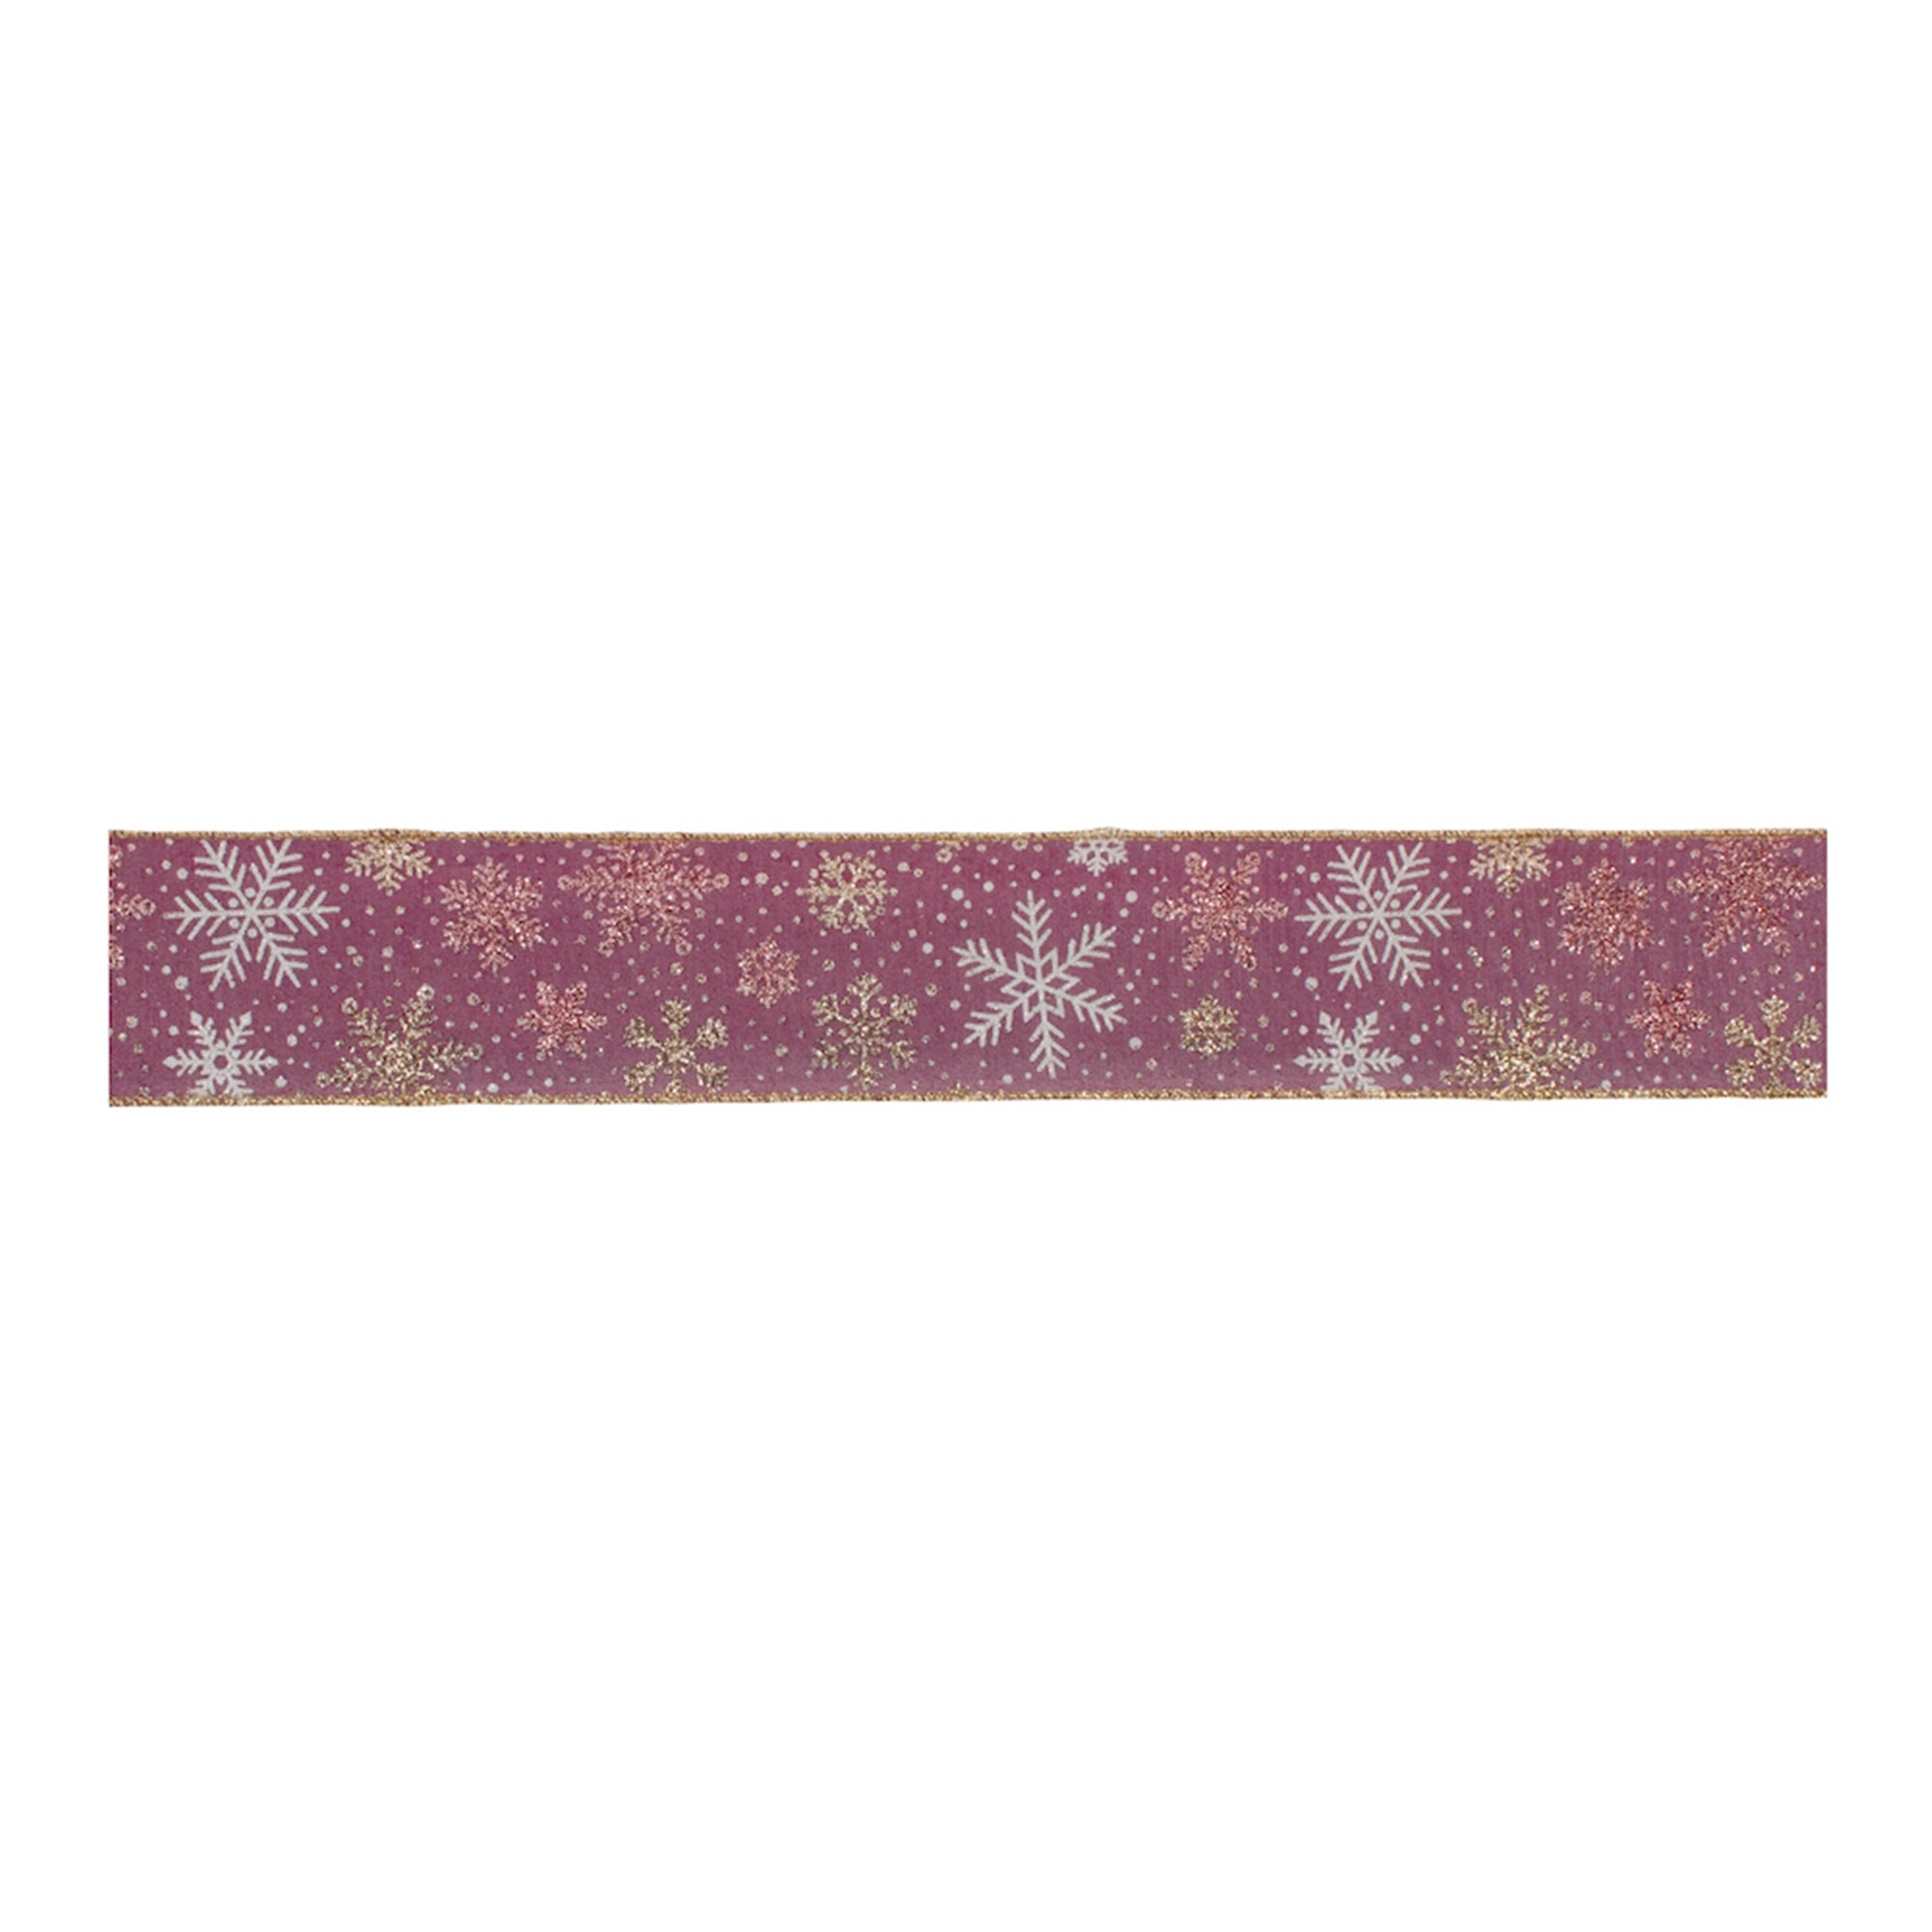 Mauve and Glitter Snowflake Wired Ribbon 2.5" x 10yds.